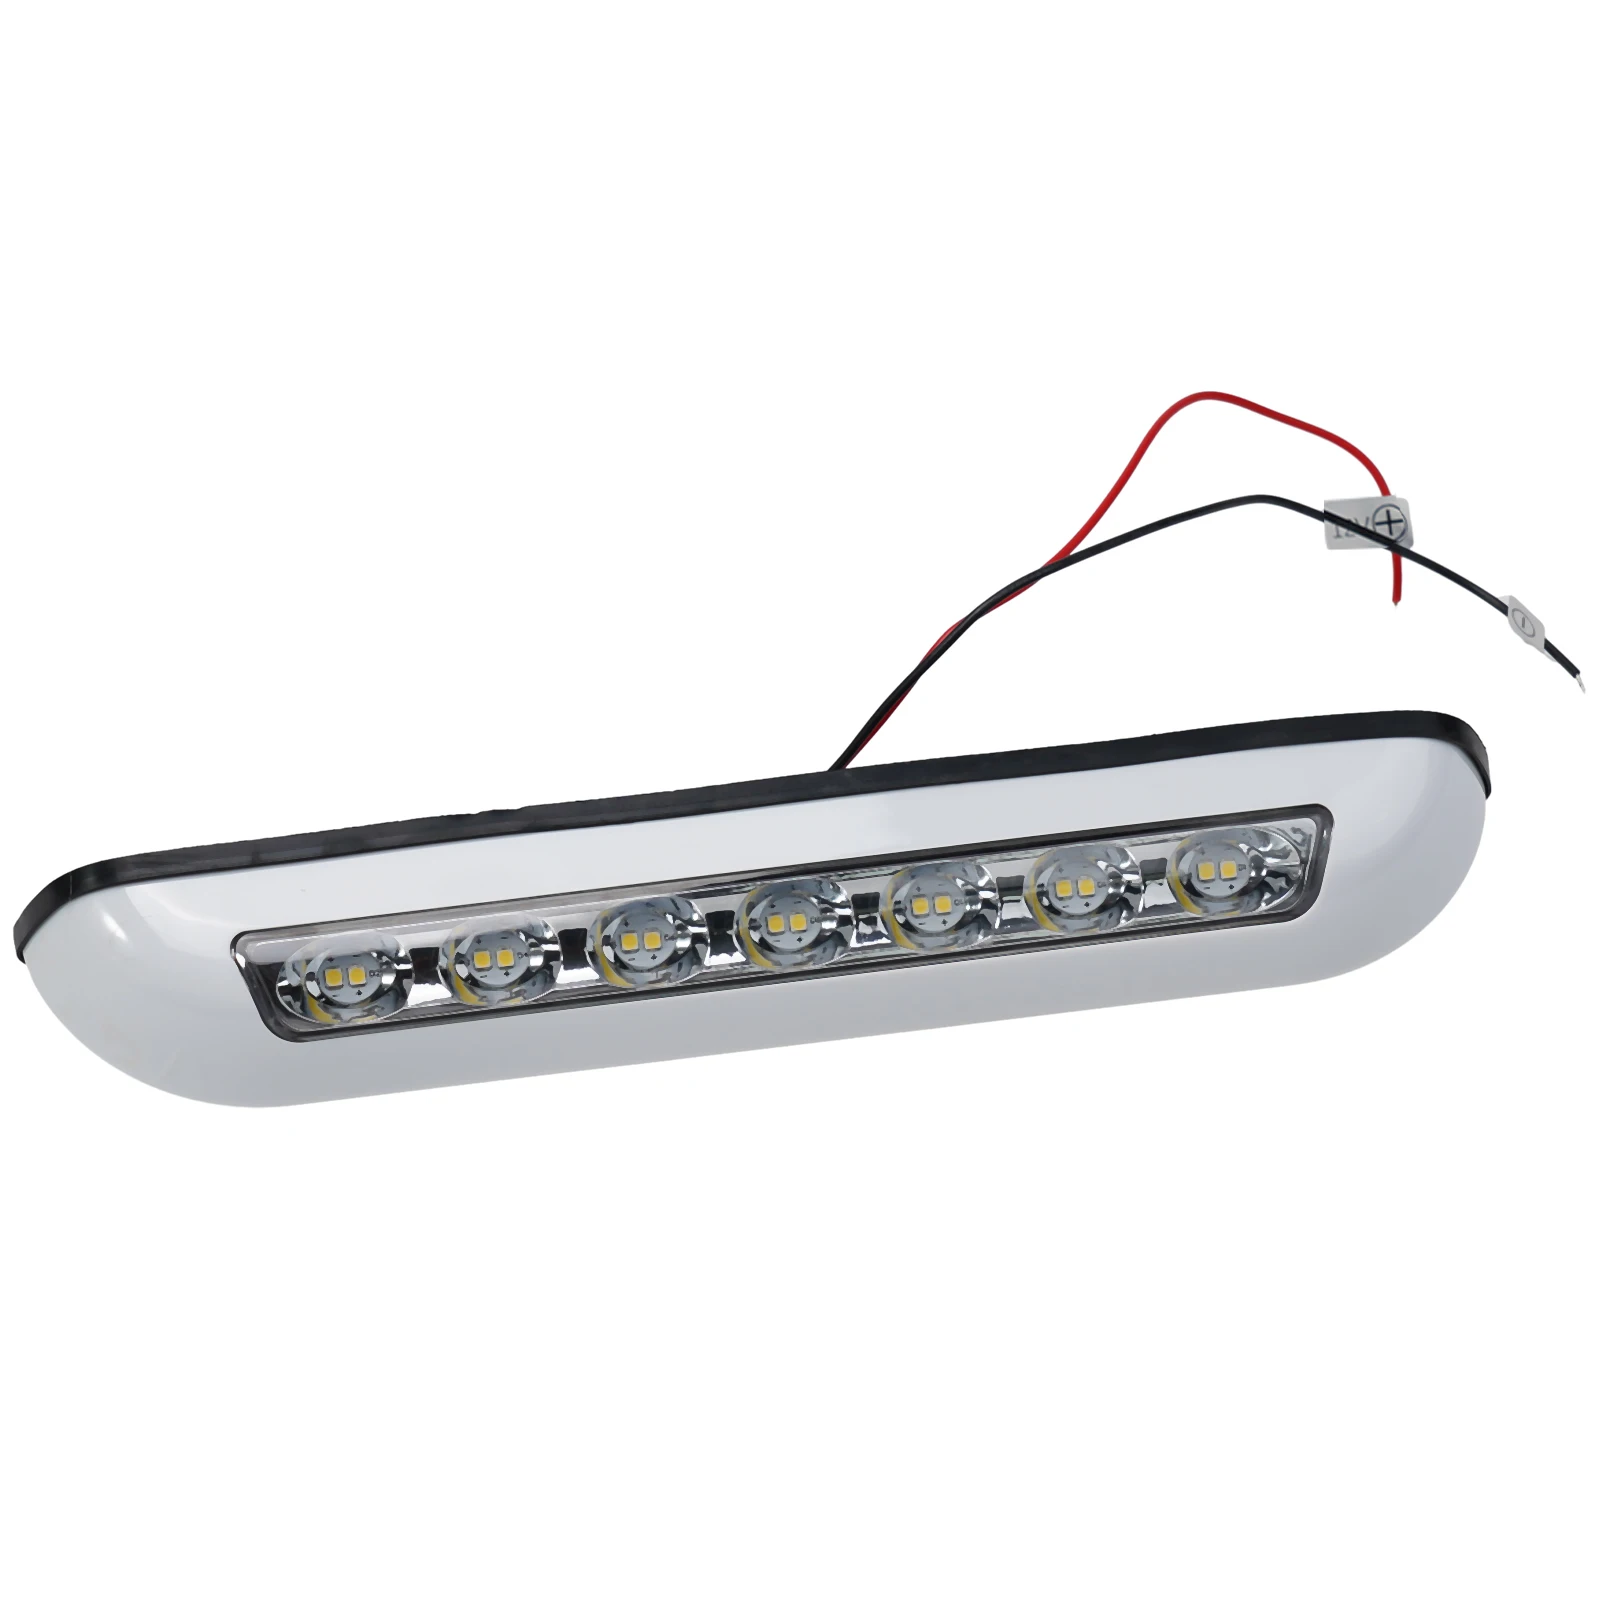 

12V24V RV LED Light with Waterproof Rating IP67 8W Power Ideal for RVs and Boats Enhance Your Lighting Needs